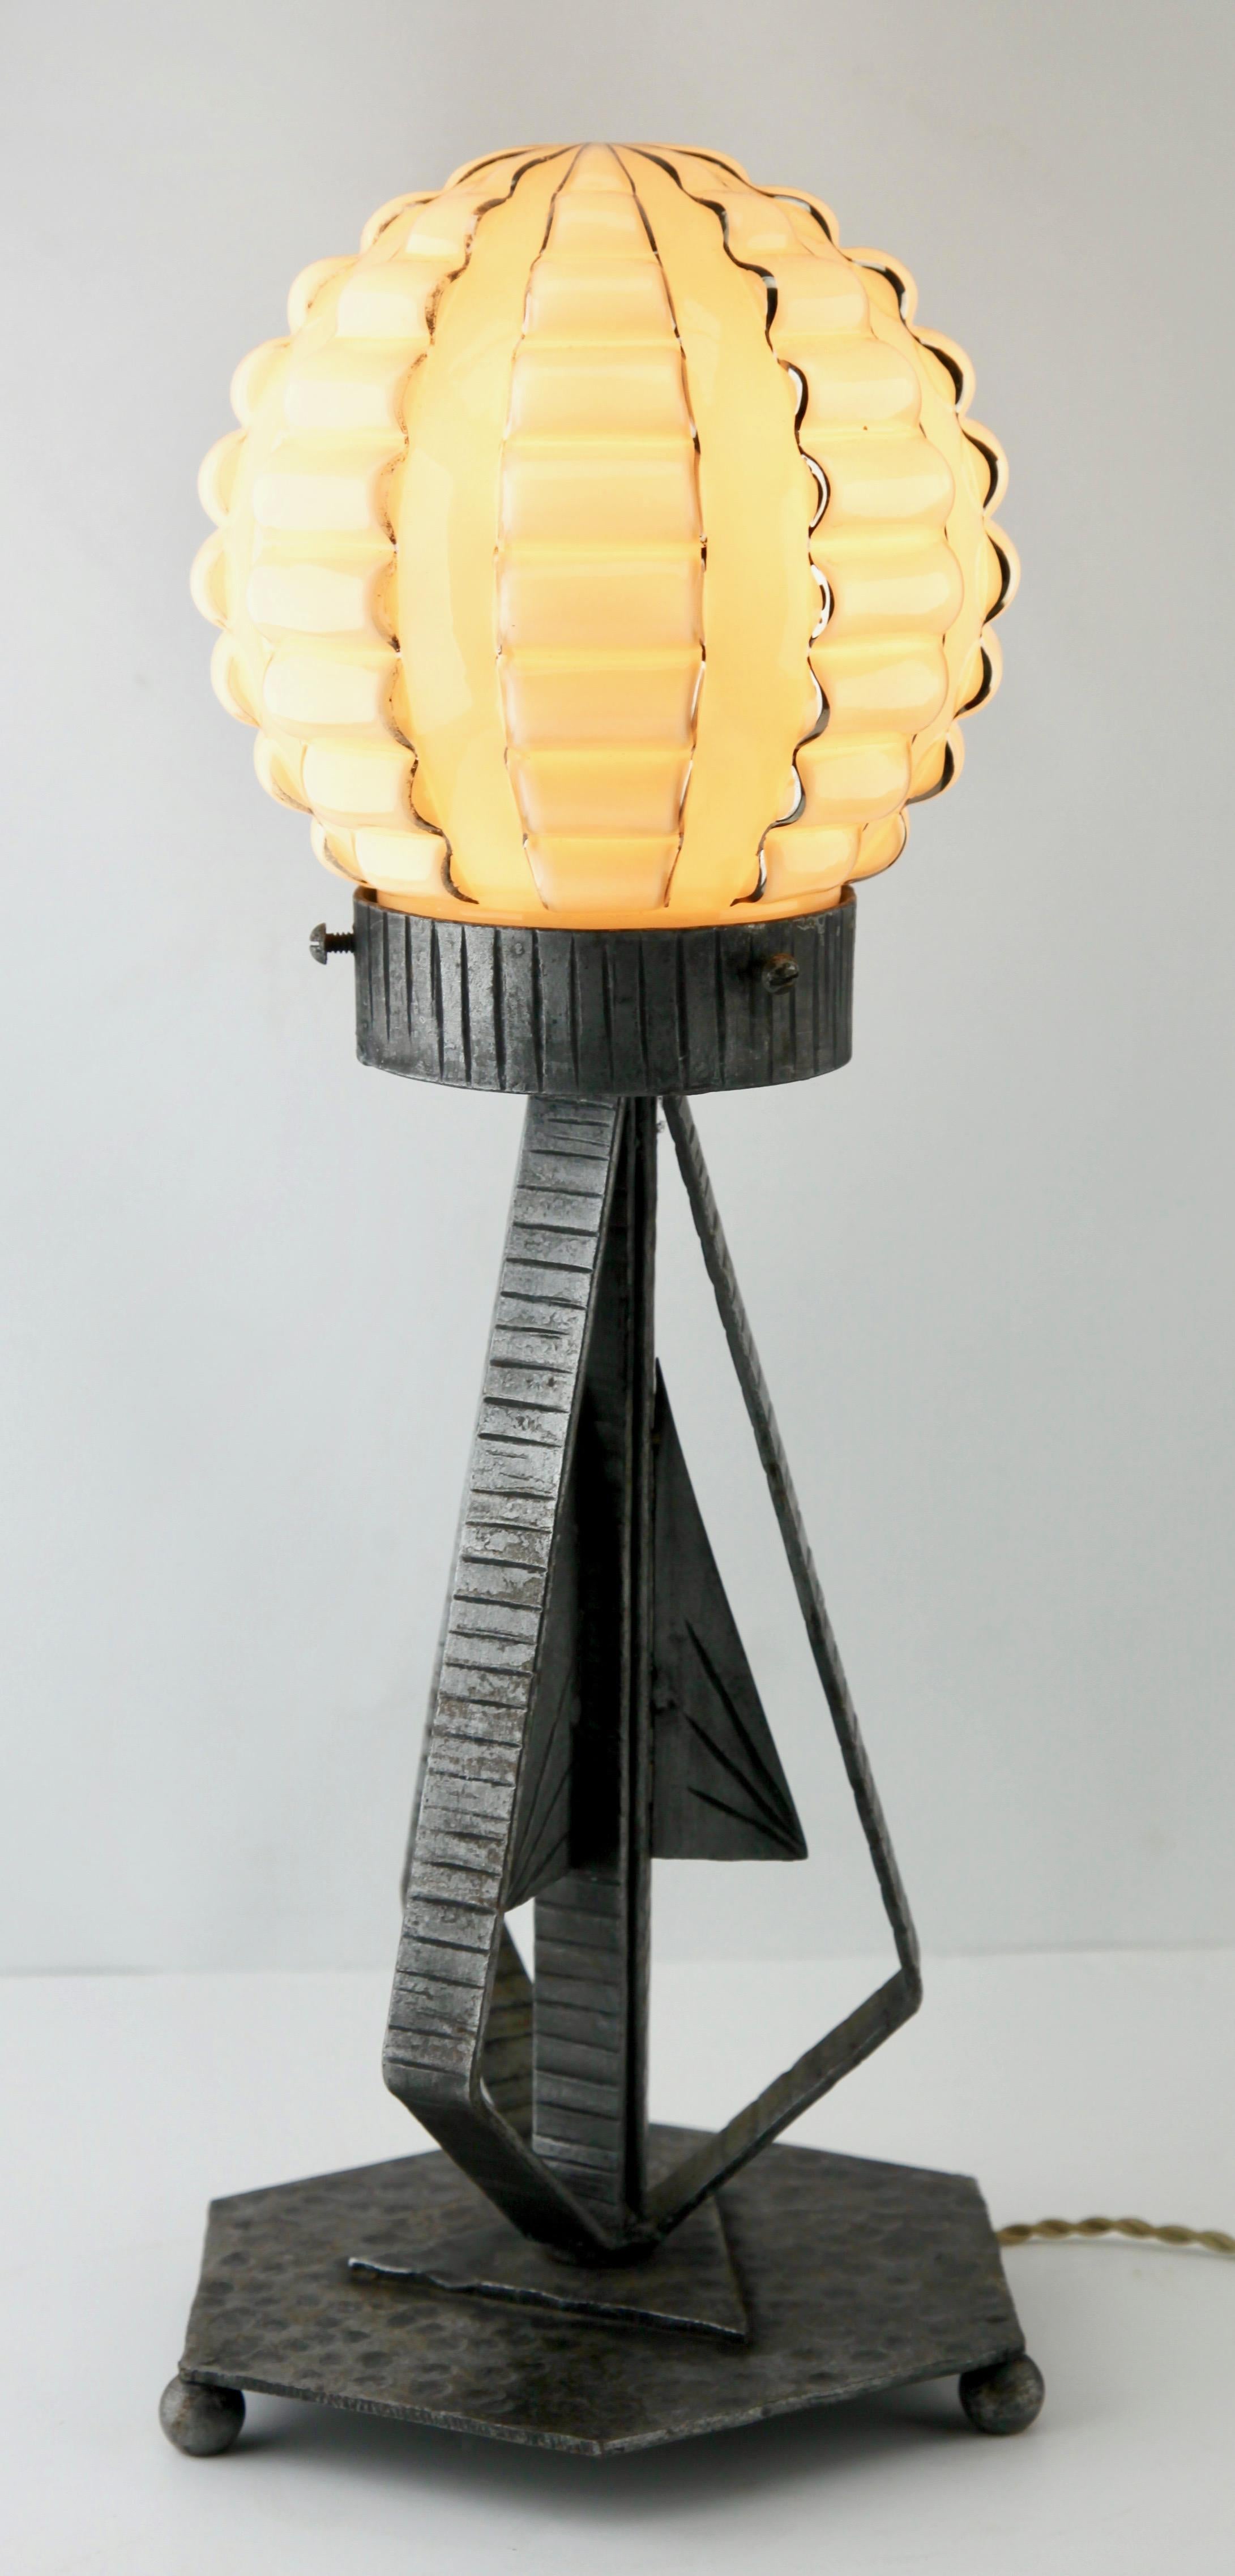 A wonderful French Art Deco lamp. The stands are handmade in wrought iron with black finish patina and hammered with a pattern. The metalwork is of excellent quality.
Crowned with bright shades in opaline glass with golden highlights.

In